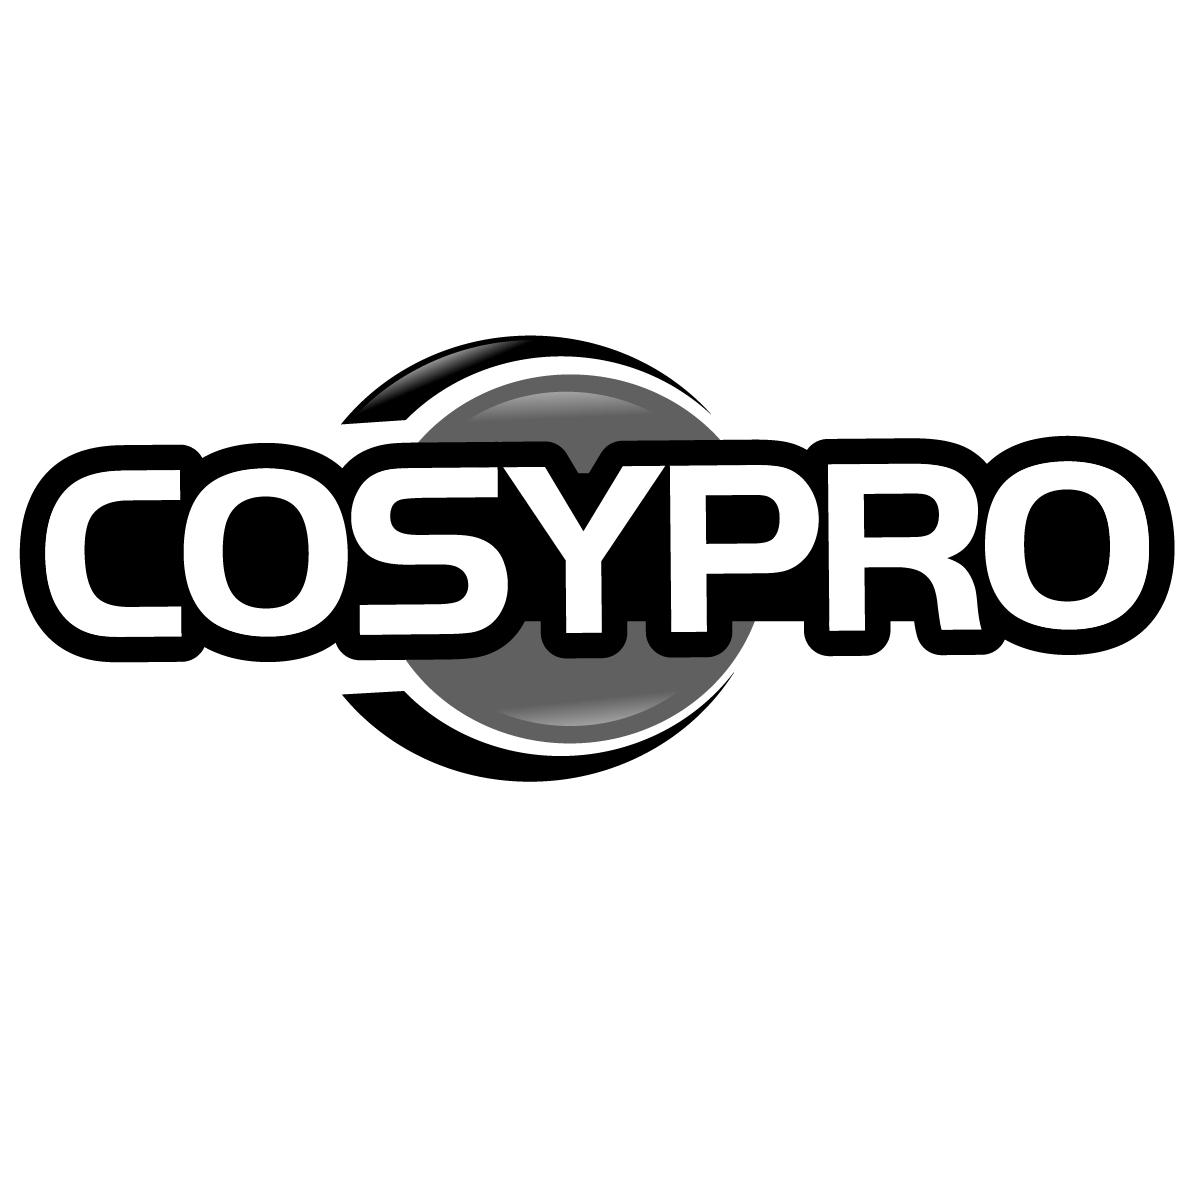 COSYPRO